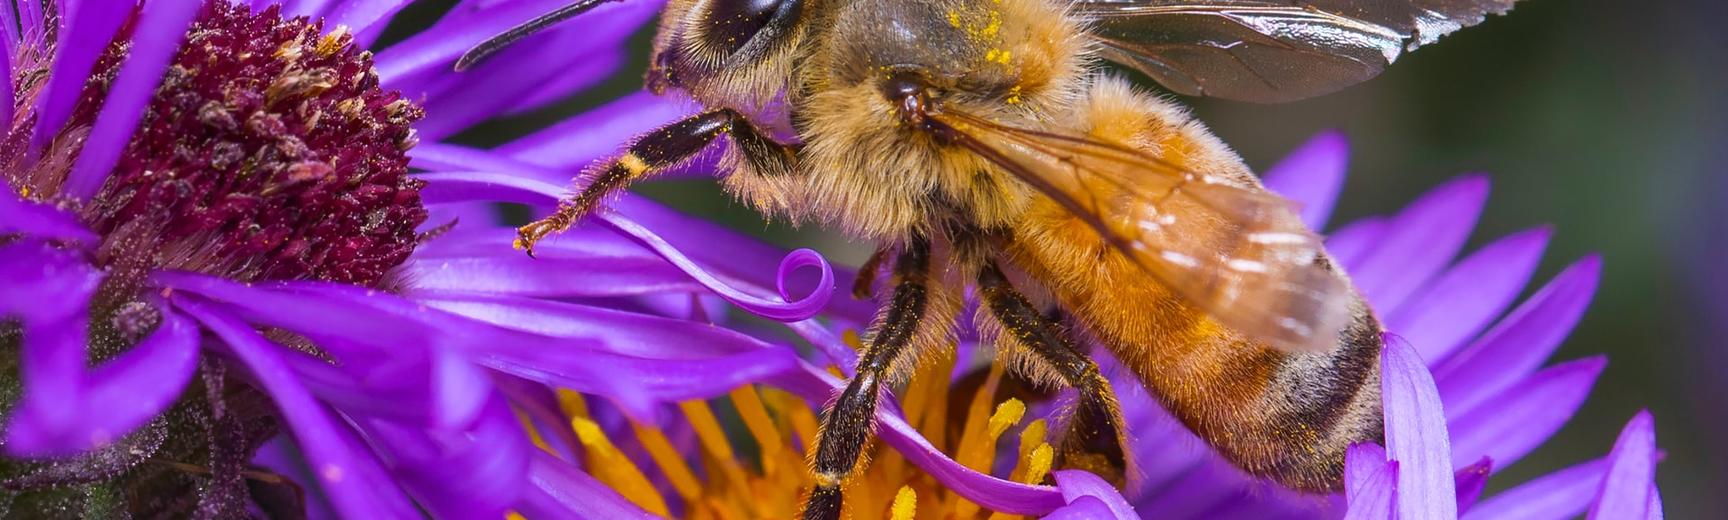 Bee on a flower by Dustin Humes